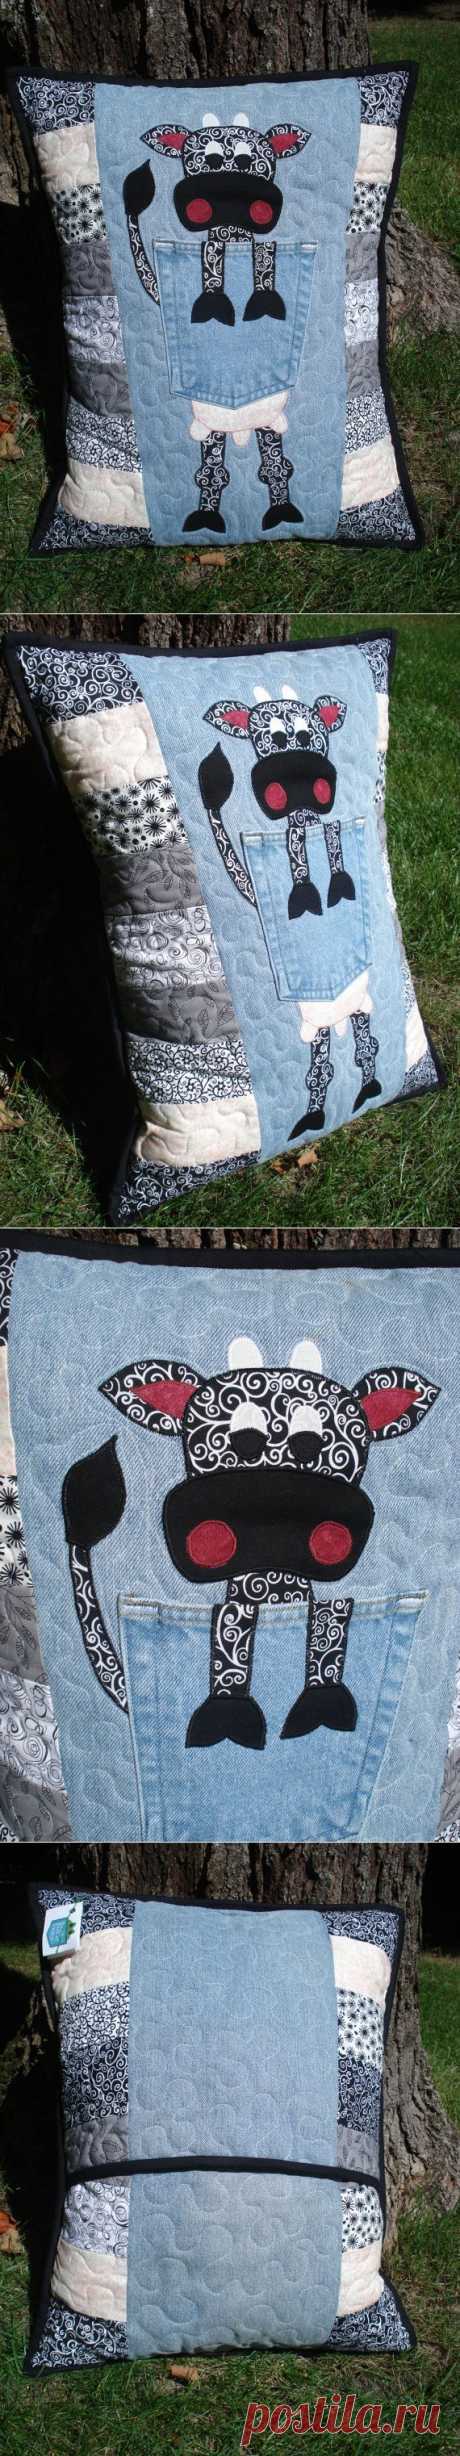 Cow Denim Pillow made with recycled jeans от BackPocketDesign